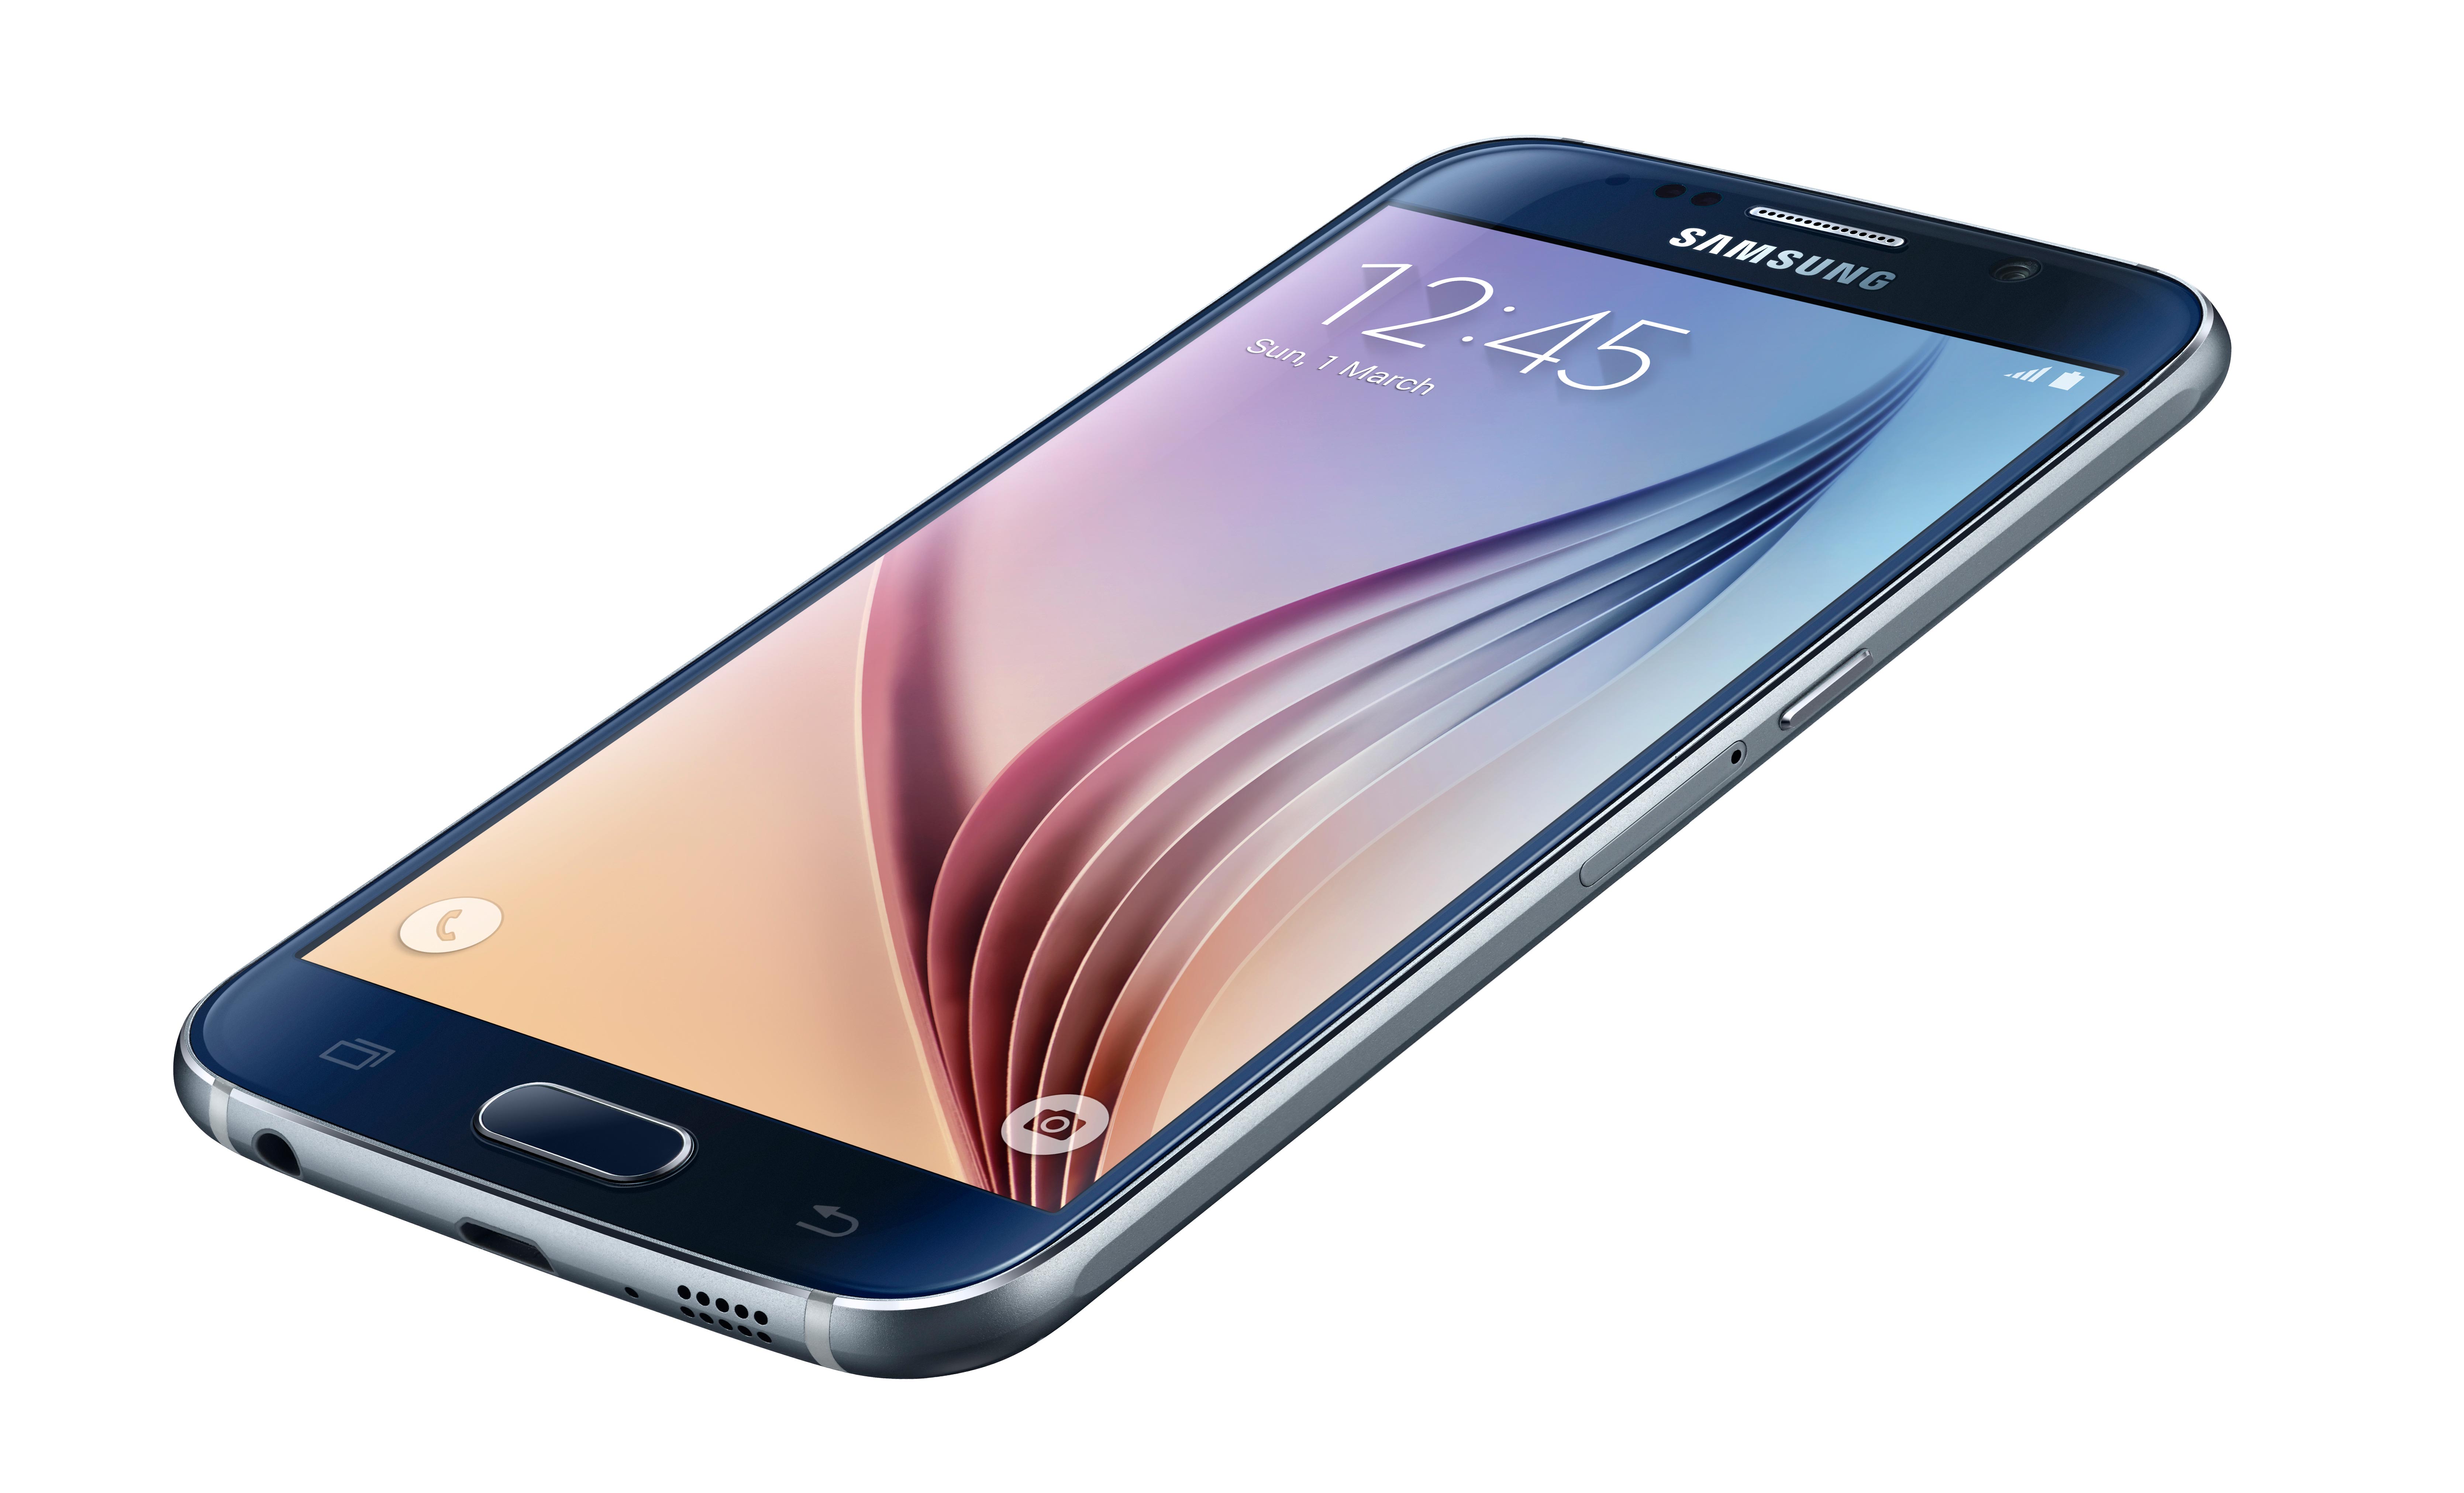 Use this Galaxy S6 carrier comparison to pick the best carrier and plans.